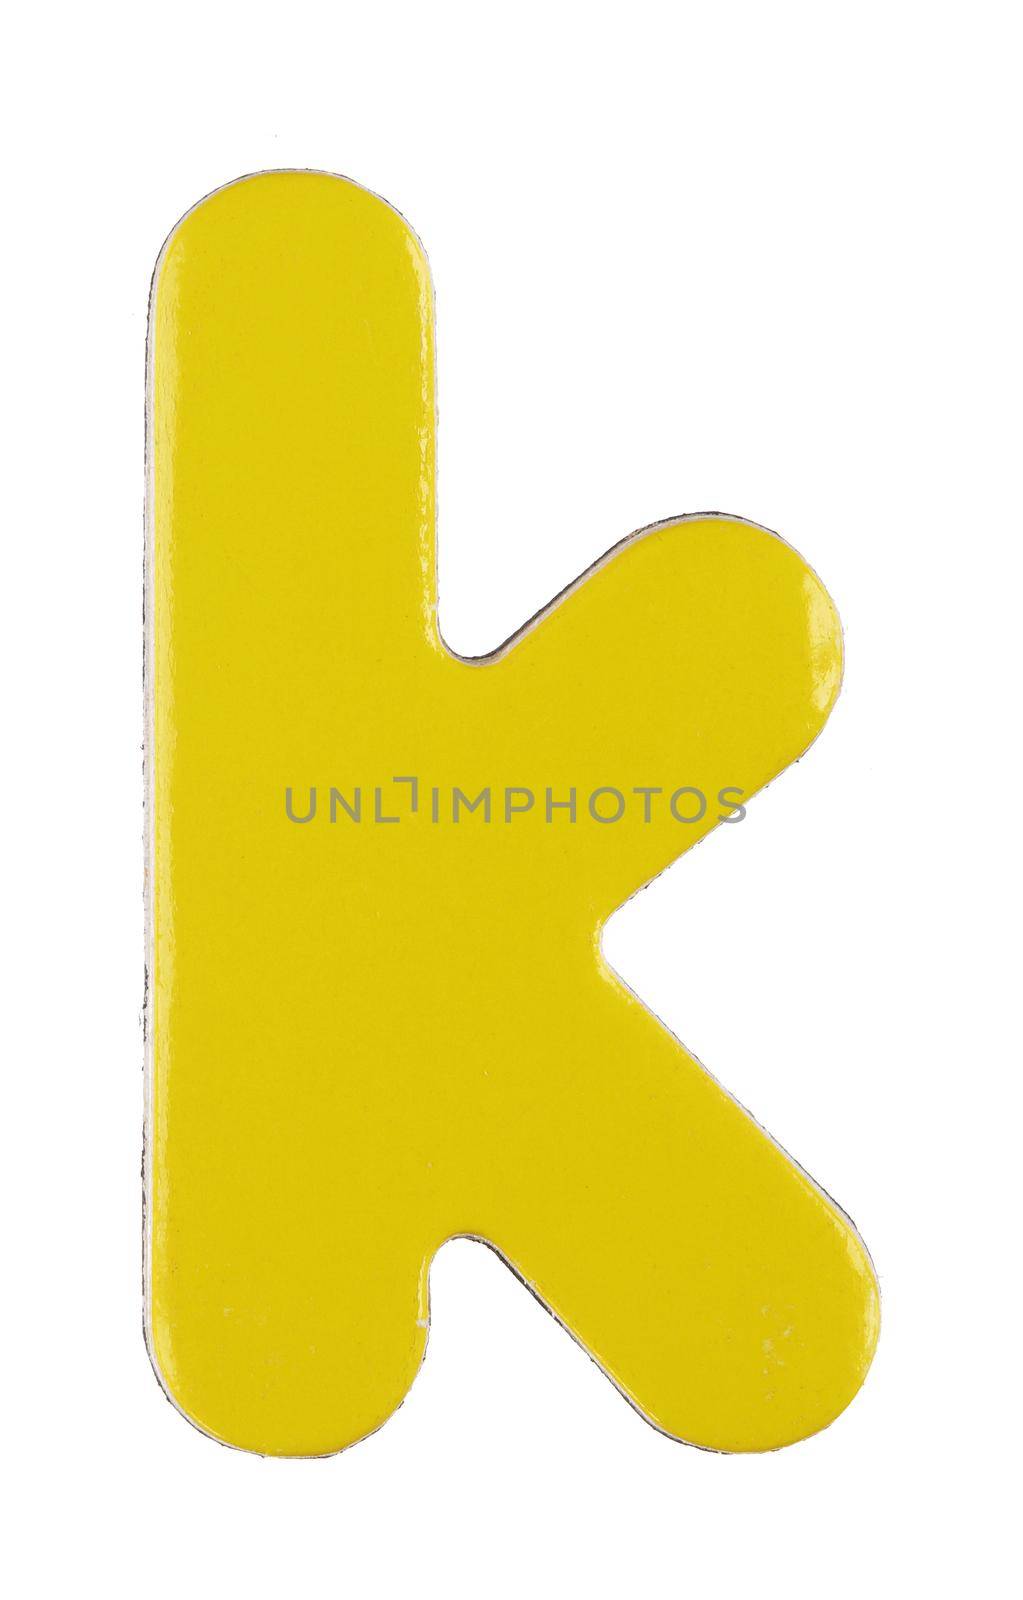 A lower case k magnetic letter on white with clipping path